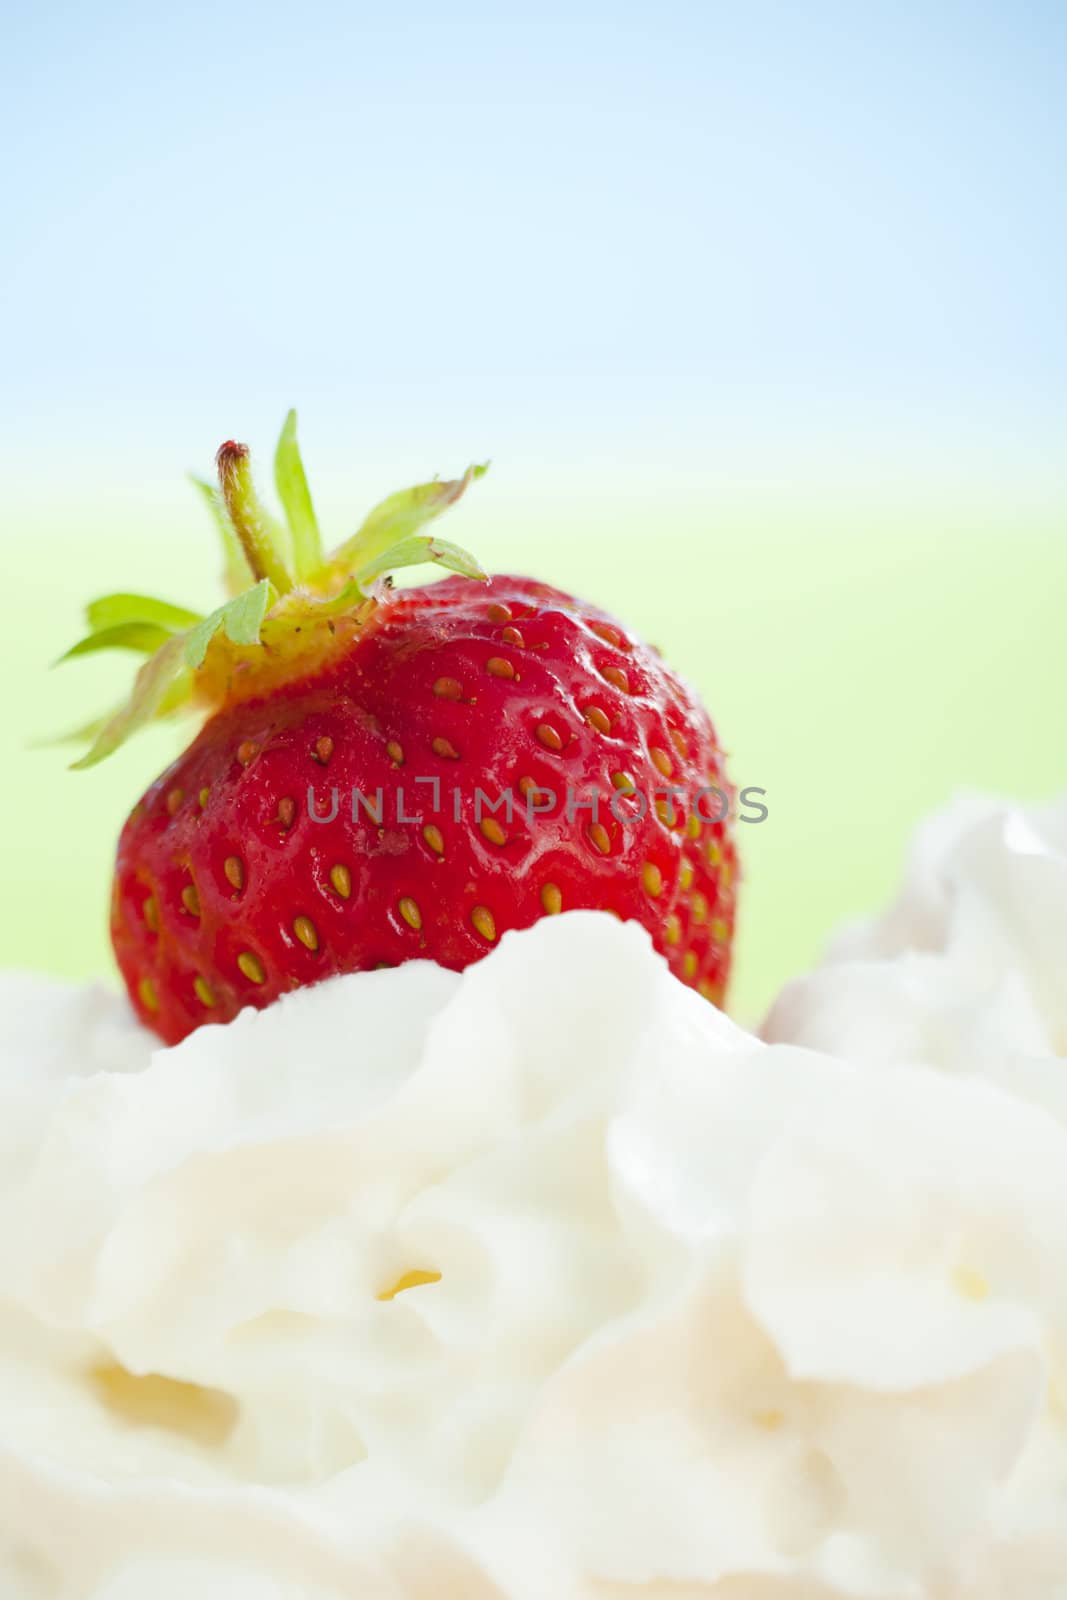 Strawberry and whipped cream by mjp